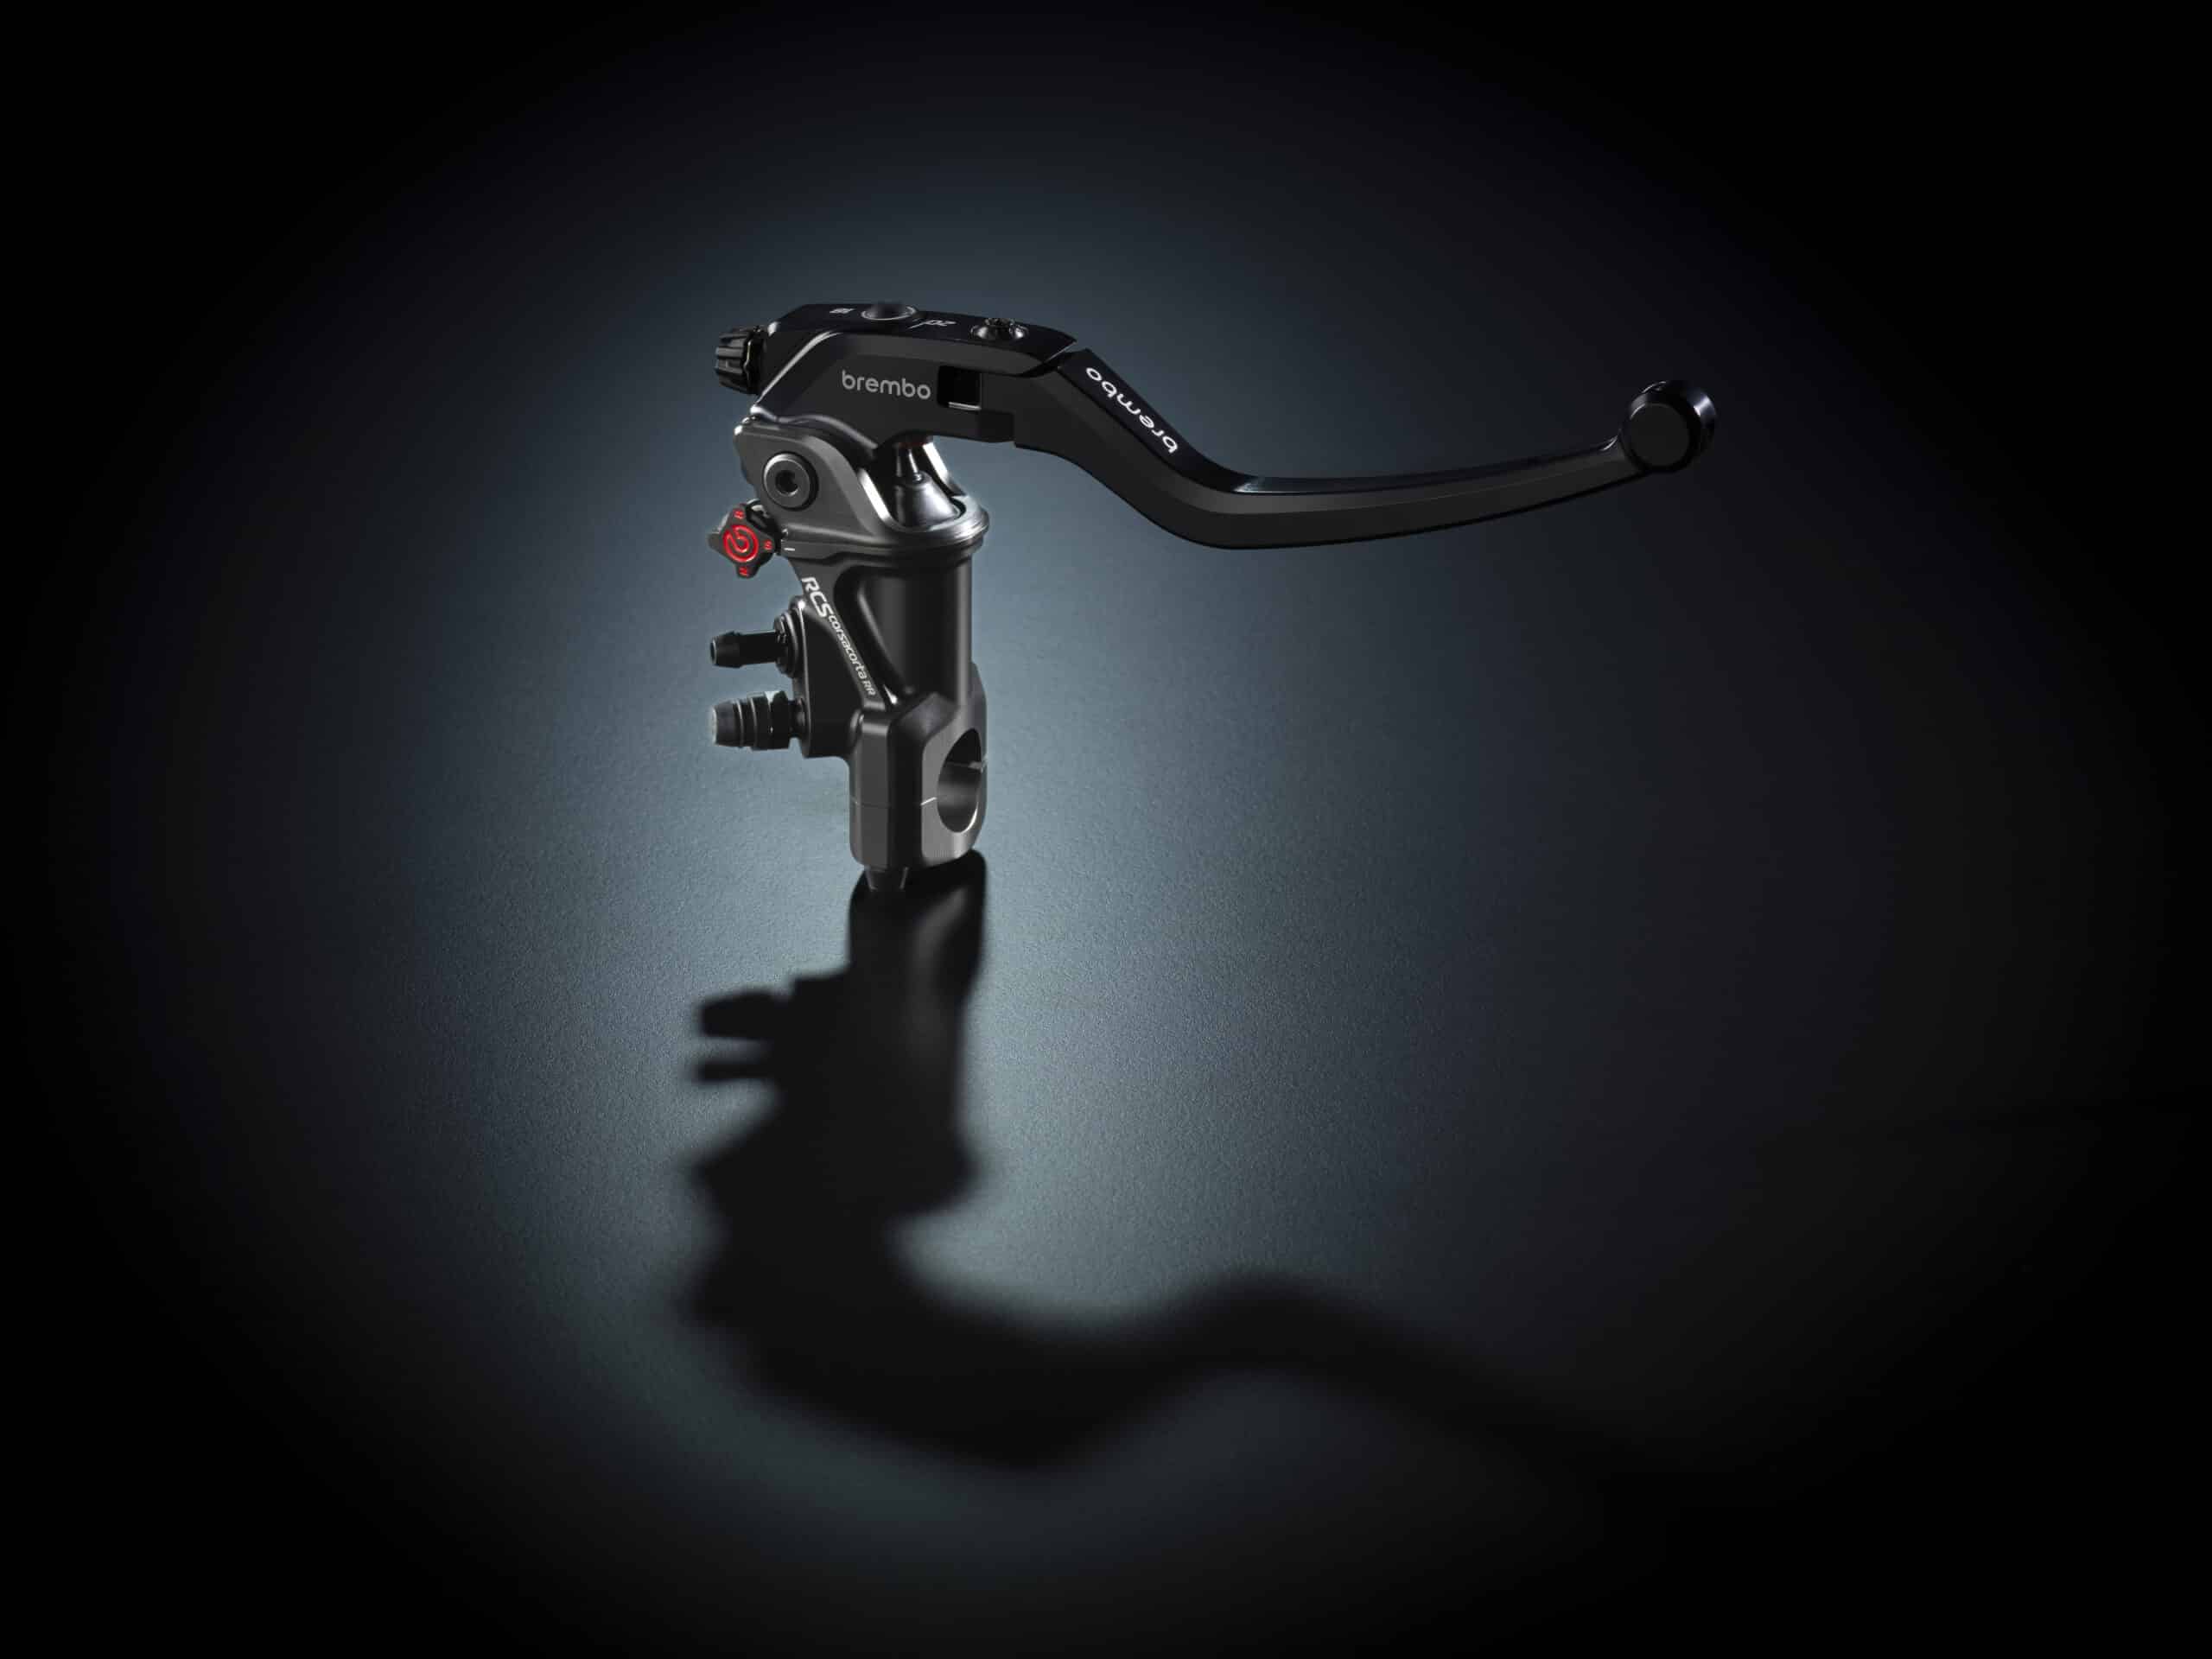 Brembo launched a new radial master cylinder for motorcycles